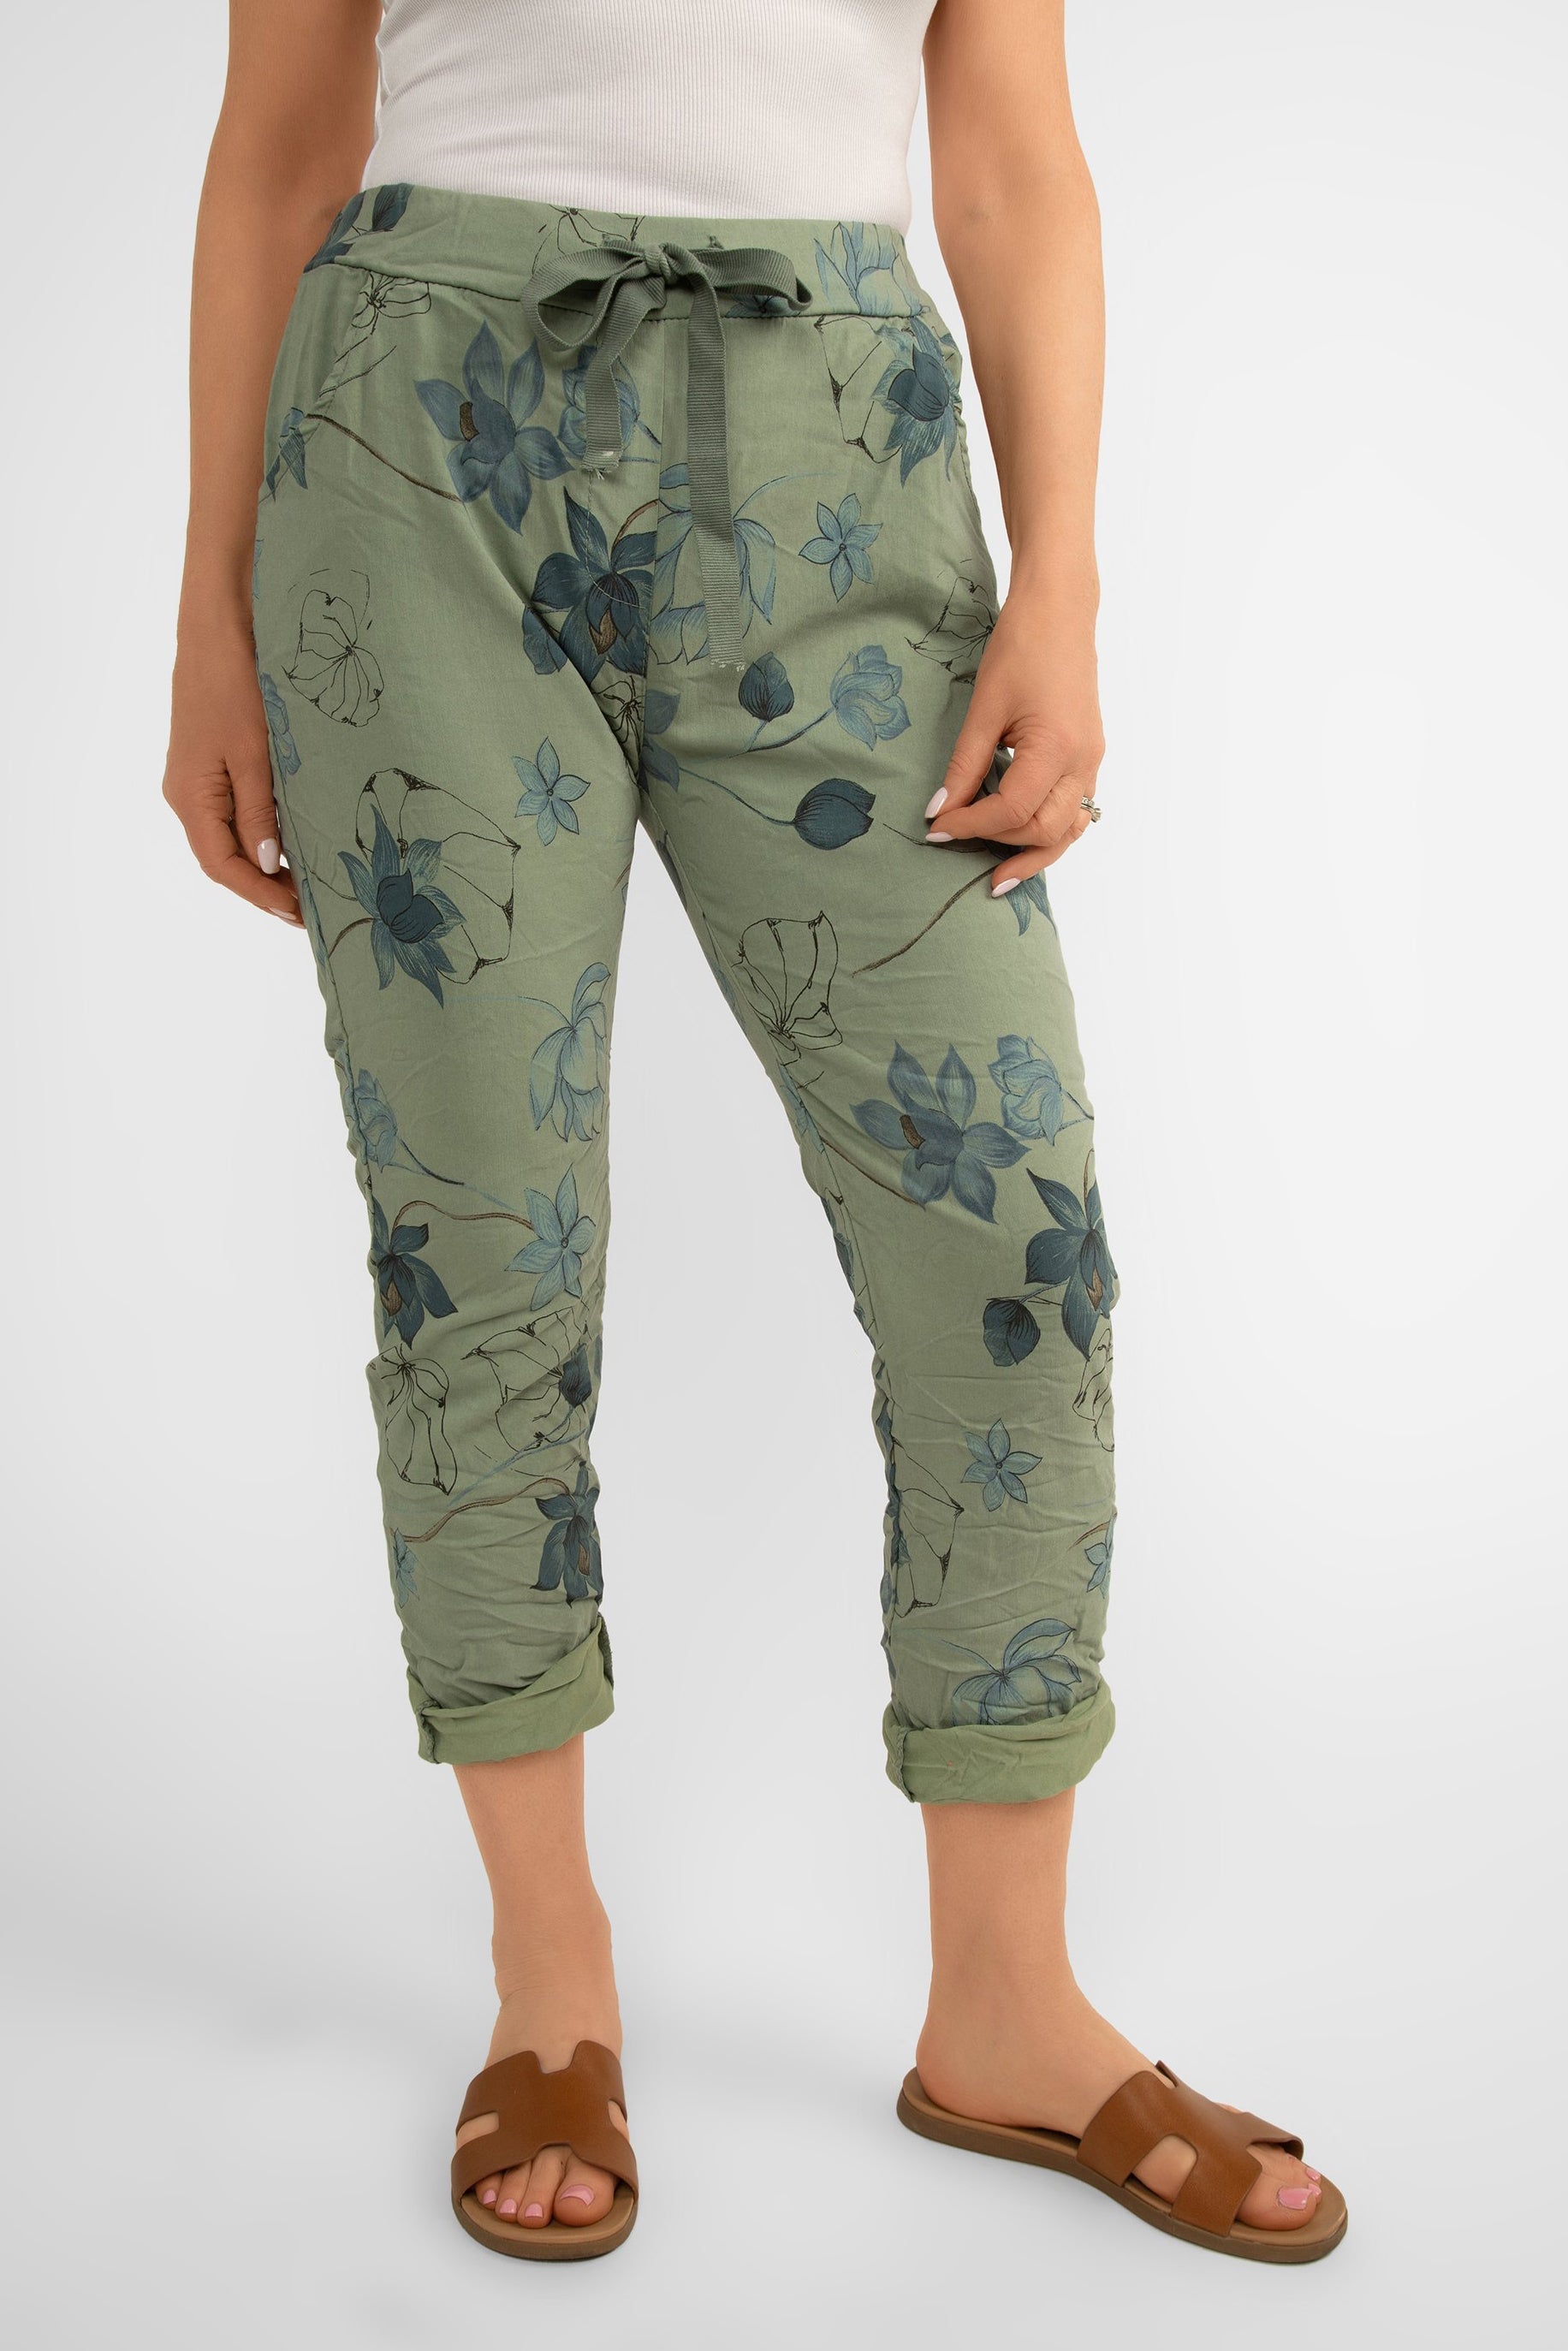 Front view of Bella Amore (21036) Women's Pull On Crinkle Pants with Side Pockets, Rolled Hem, and Blue Lotus Flower Print in Military Green